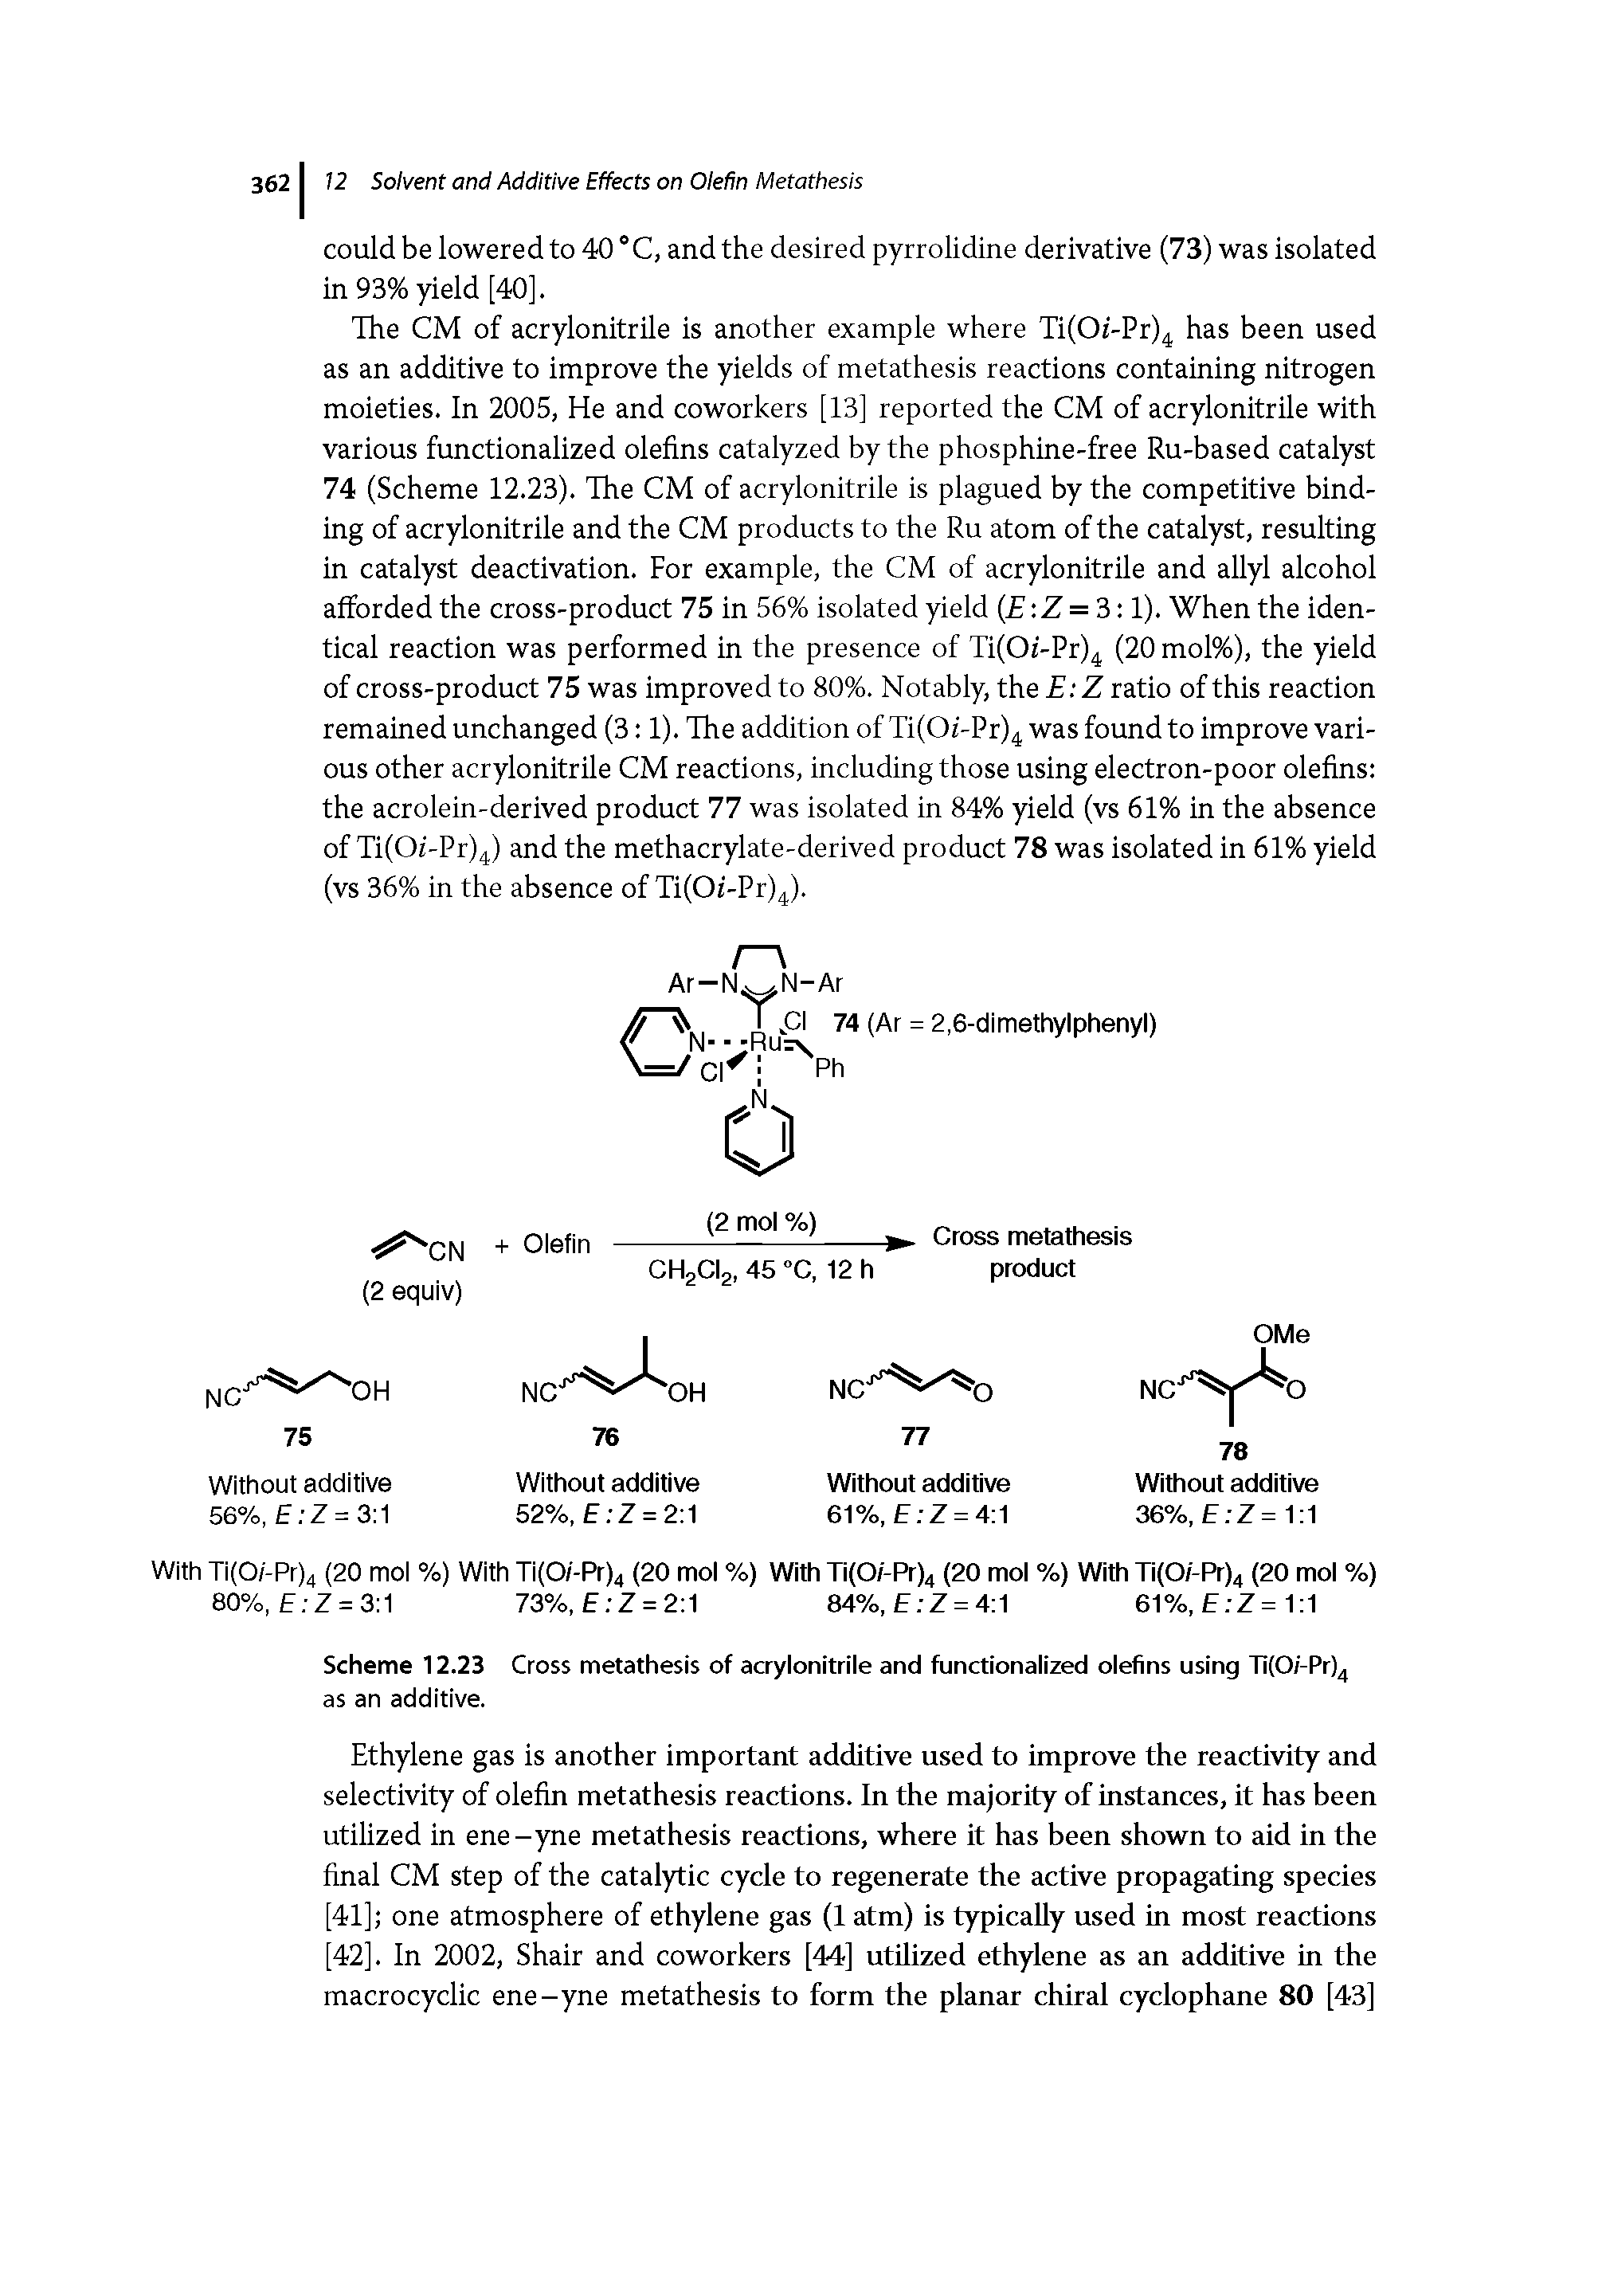 Scheme 12.23 Cross metathesis of acrylonitrile and functionalized olefins using TifOi-Prj as an additive.